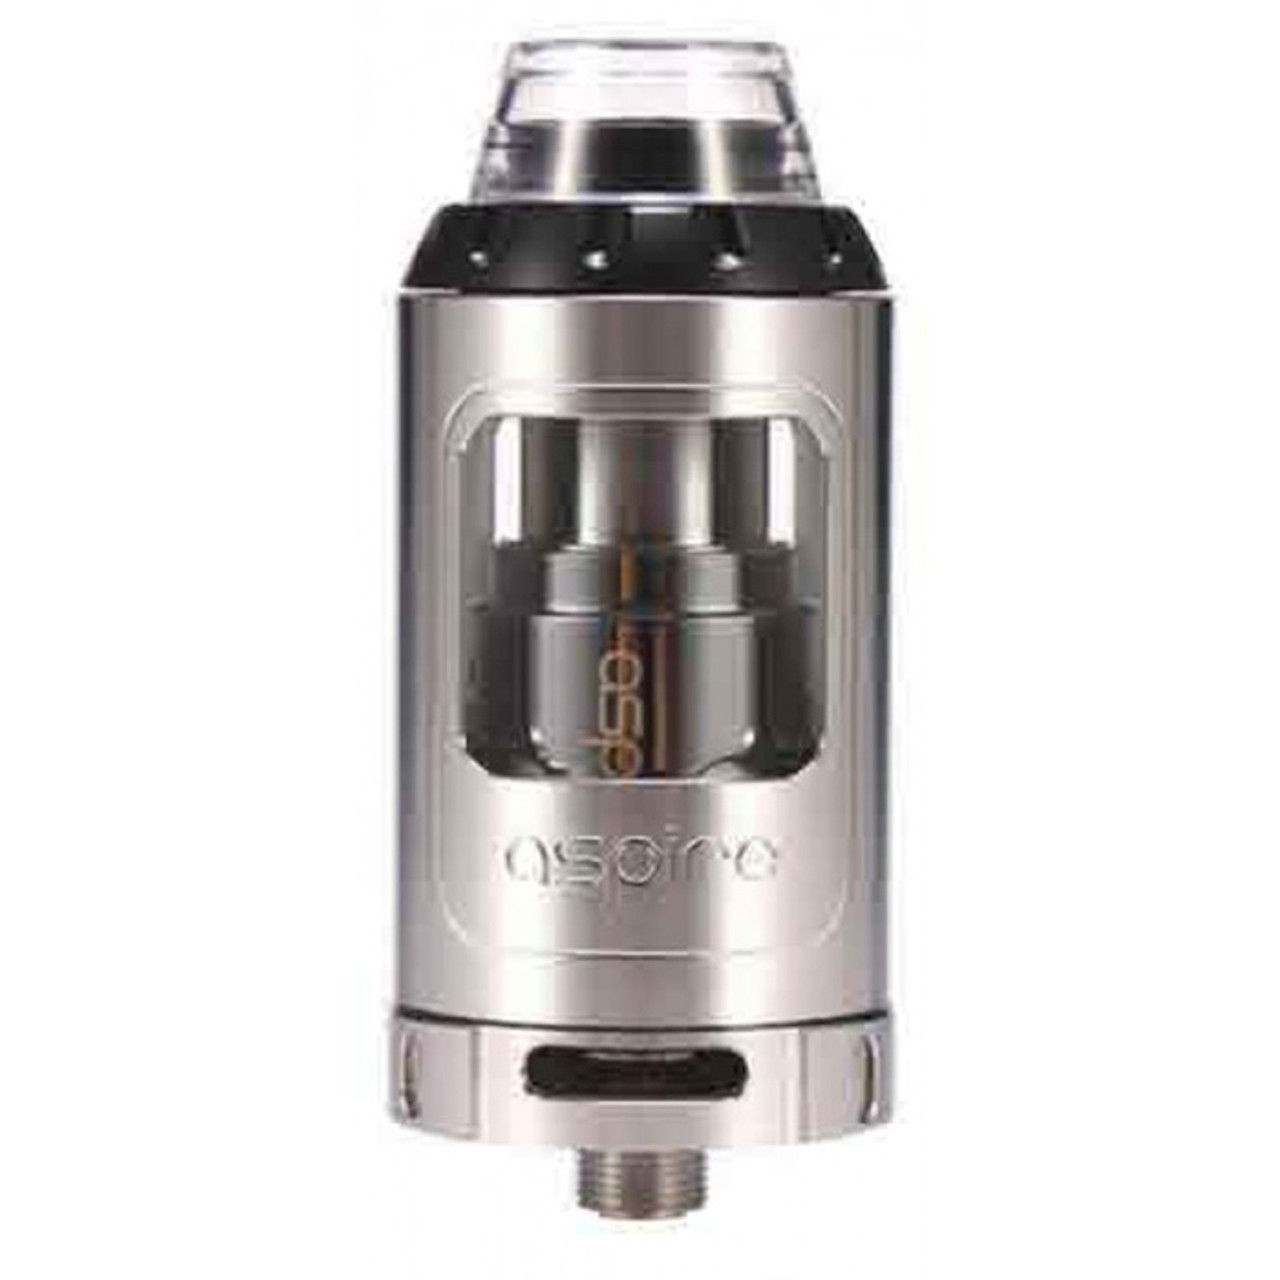 https://cdn11.bigcommerce.com/s-7huxf73ukc/images/stencil/1280x1280/products/3610/21090/Aspire-Athos-Sub-Ohm-Tank-Stainless-Steel__16715.1574906035.jpg?c=2